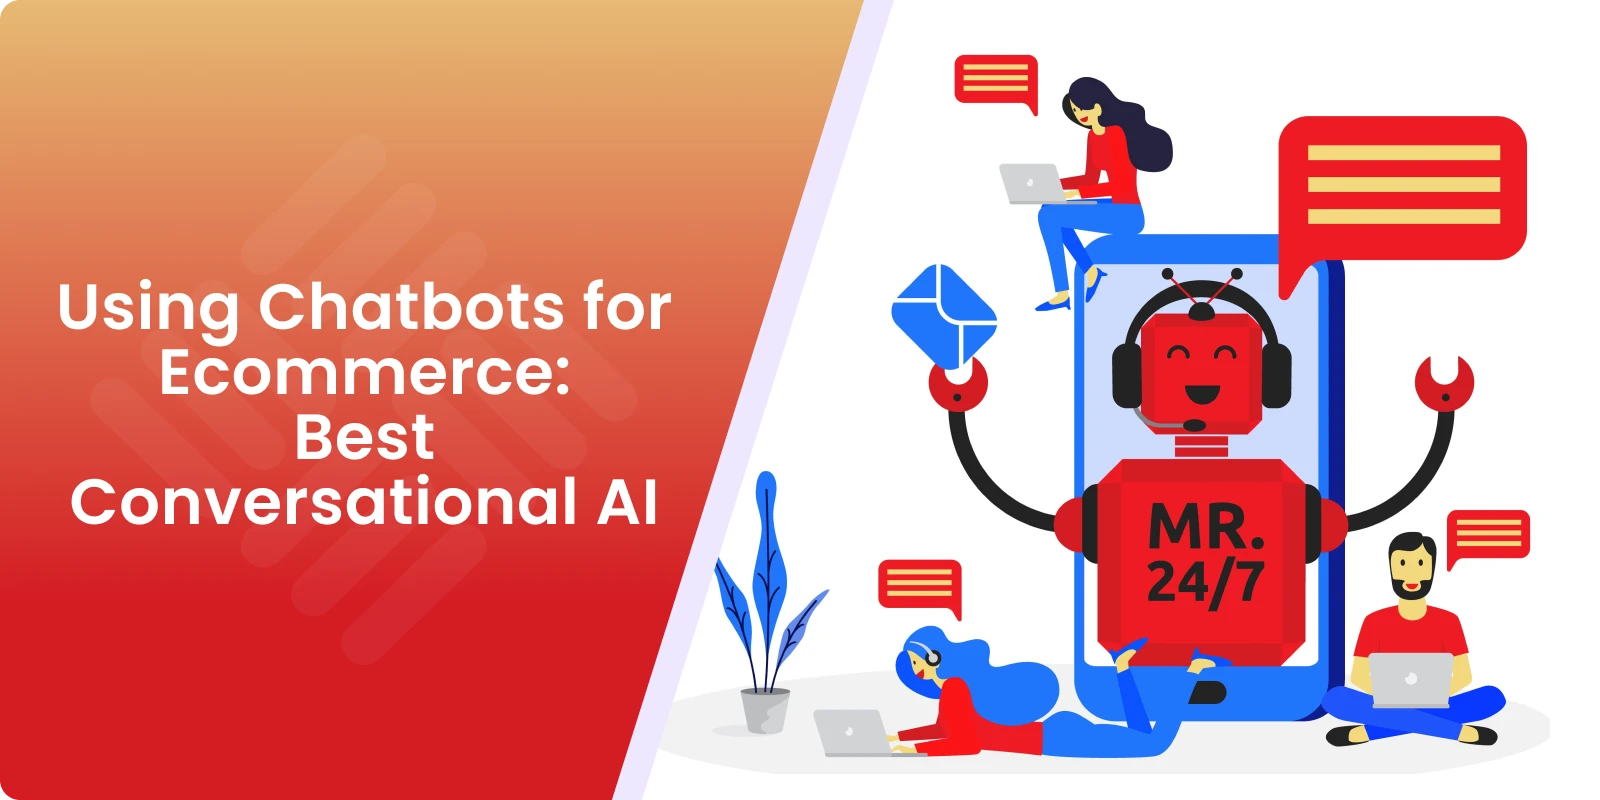 Using Chatbots for Ecommerce: Best Conversational AI